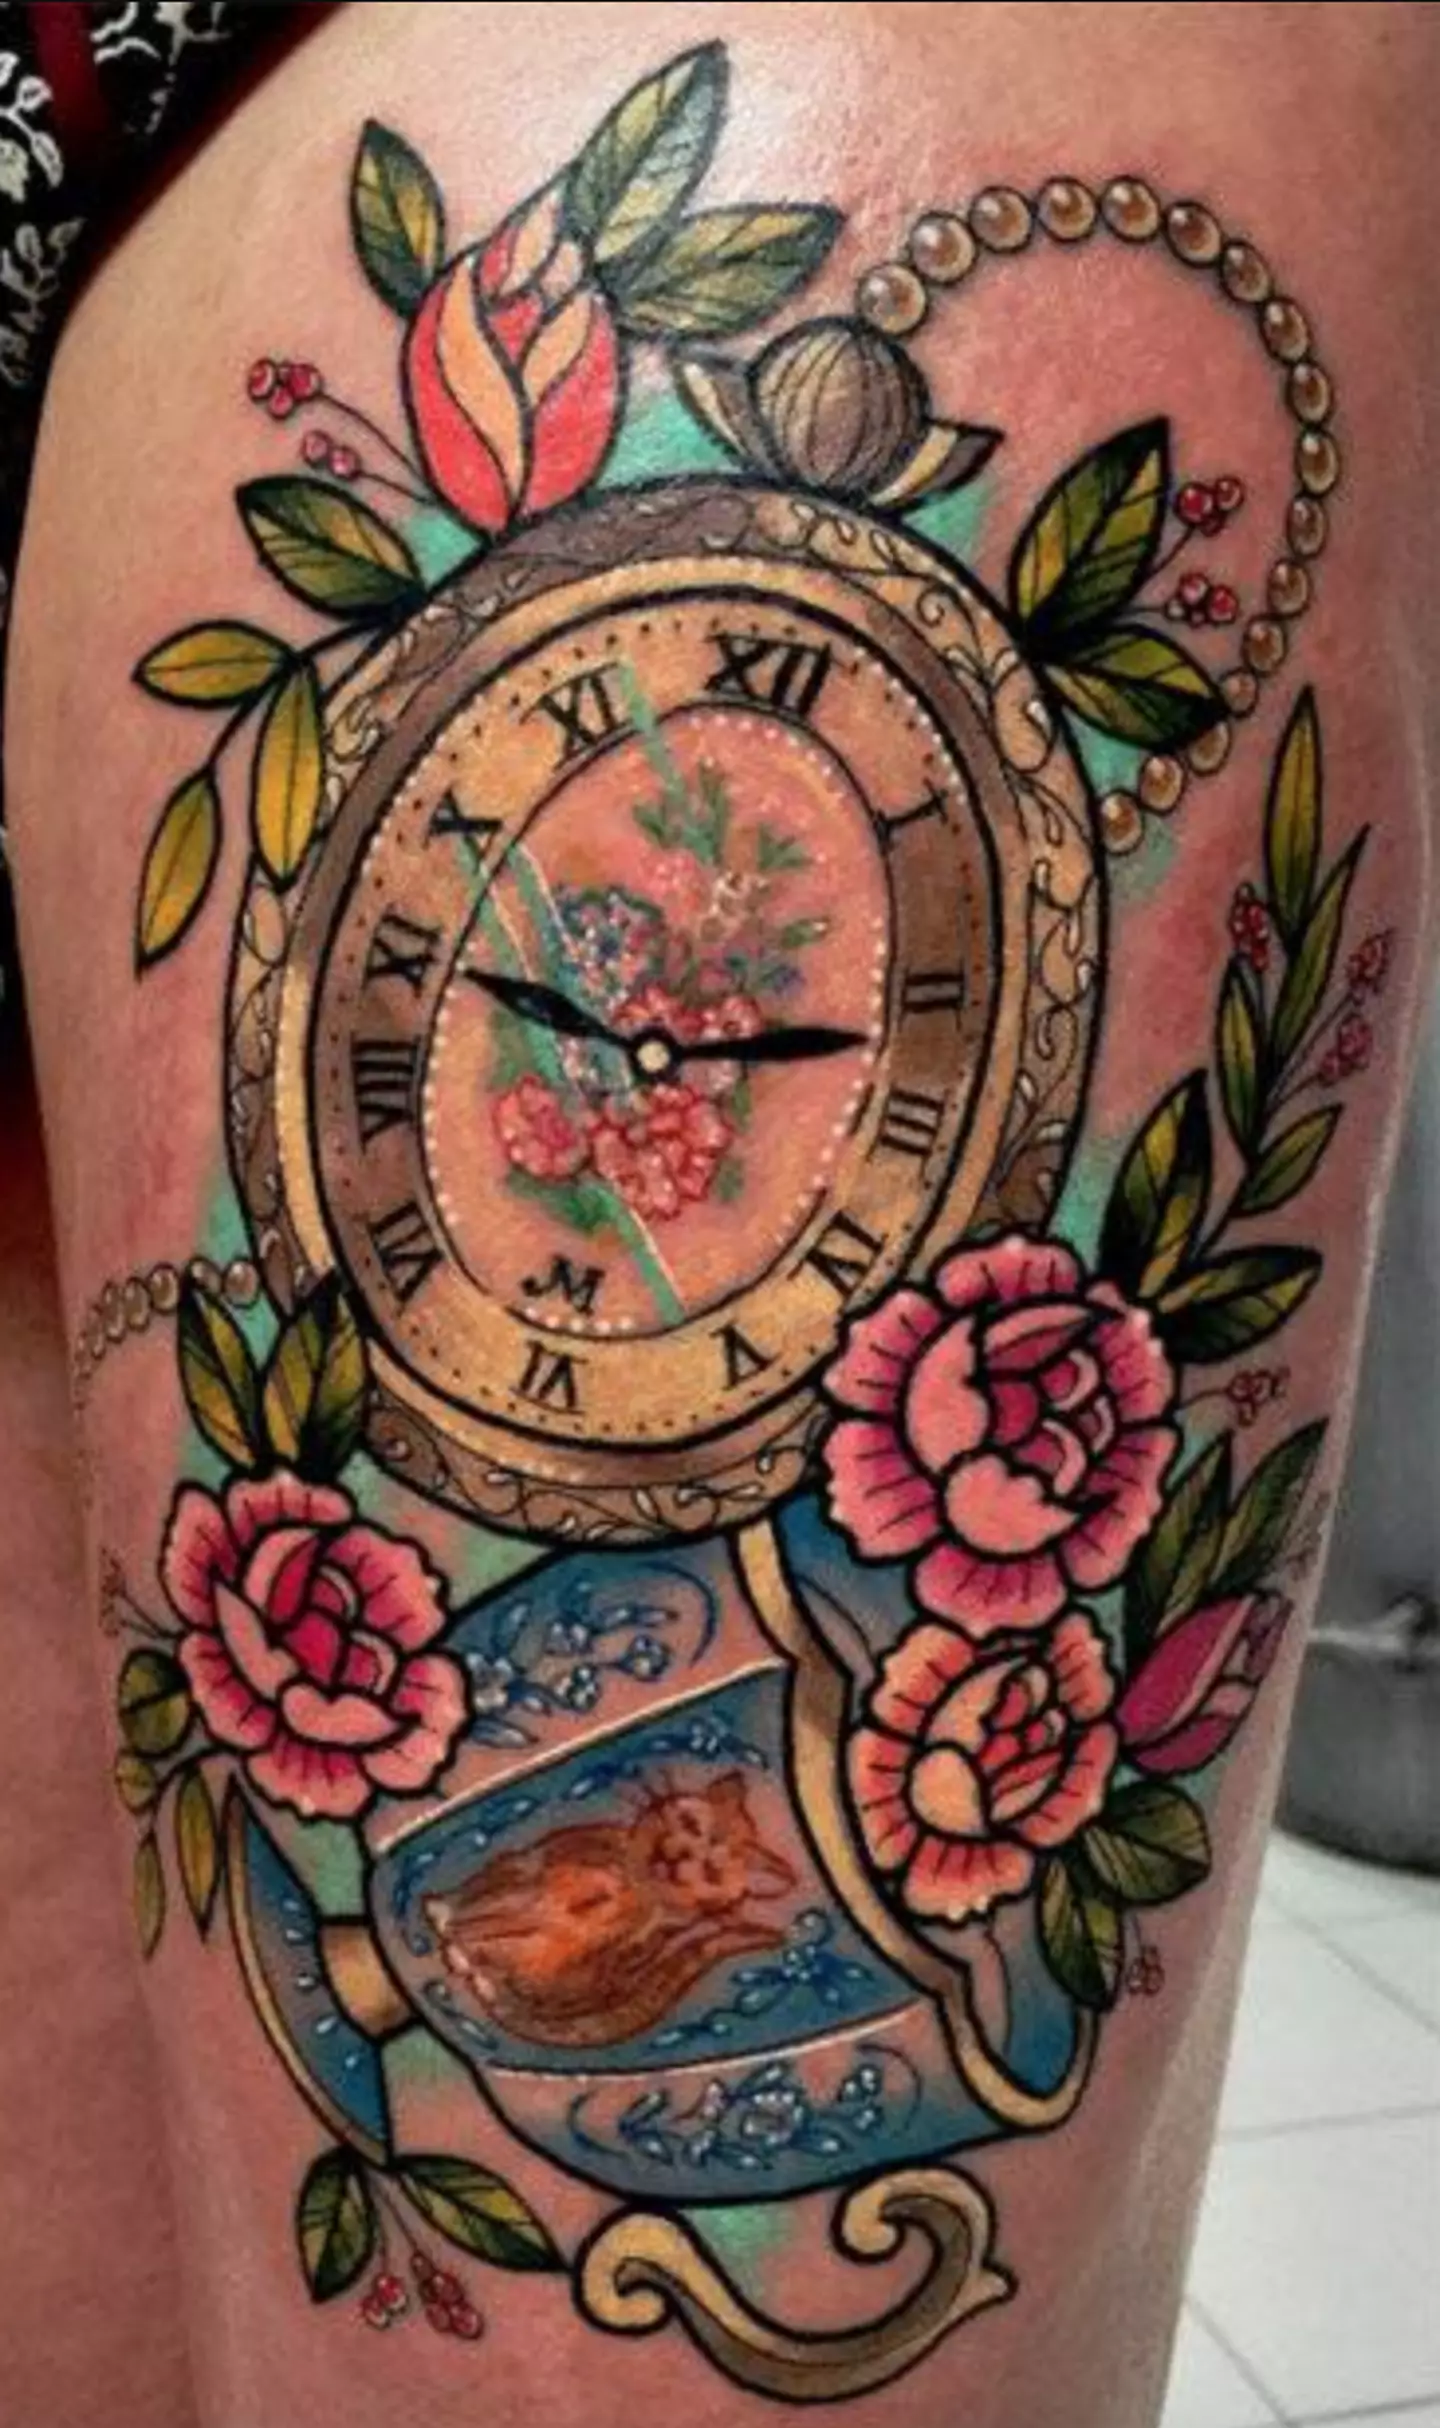 The tattoo artist accidentally gave the clock face two elevens (E4)